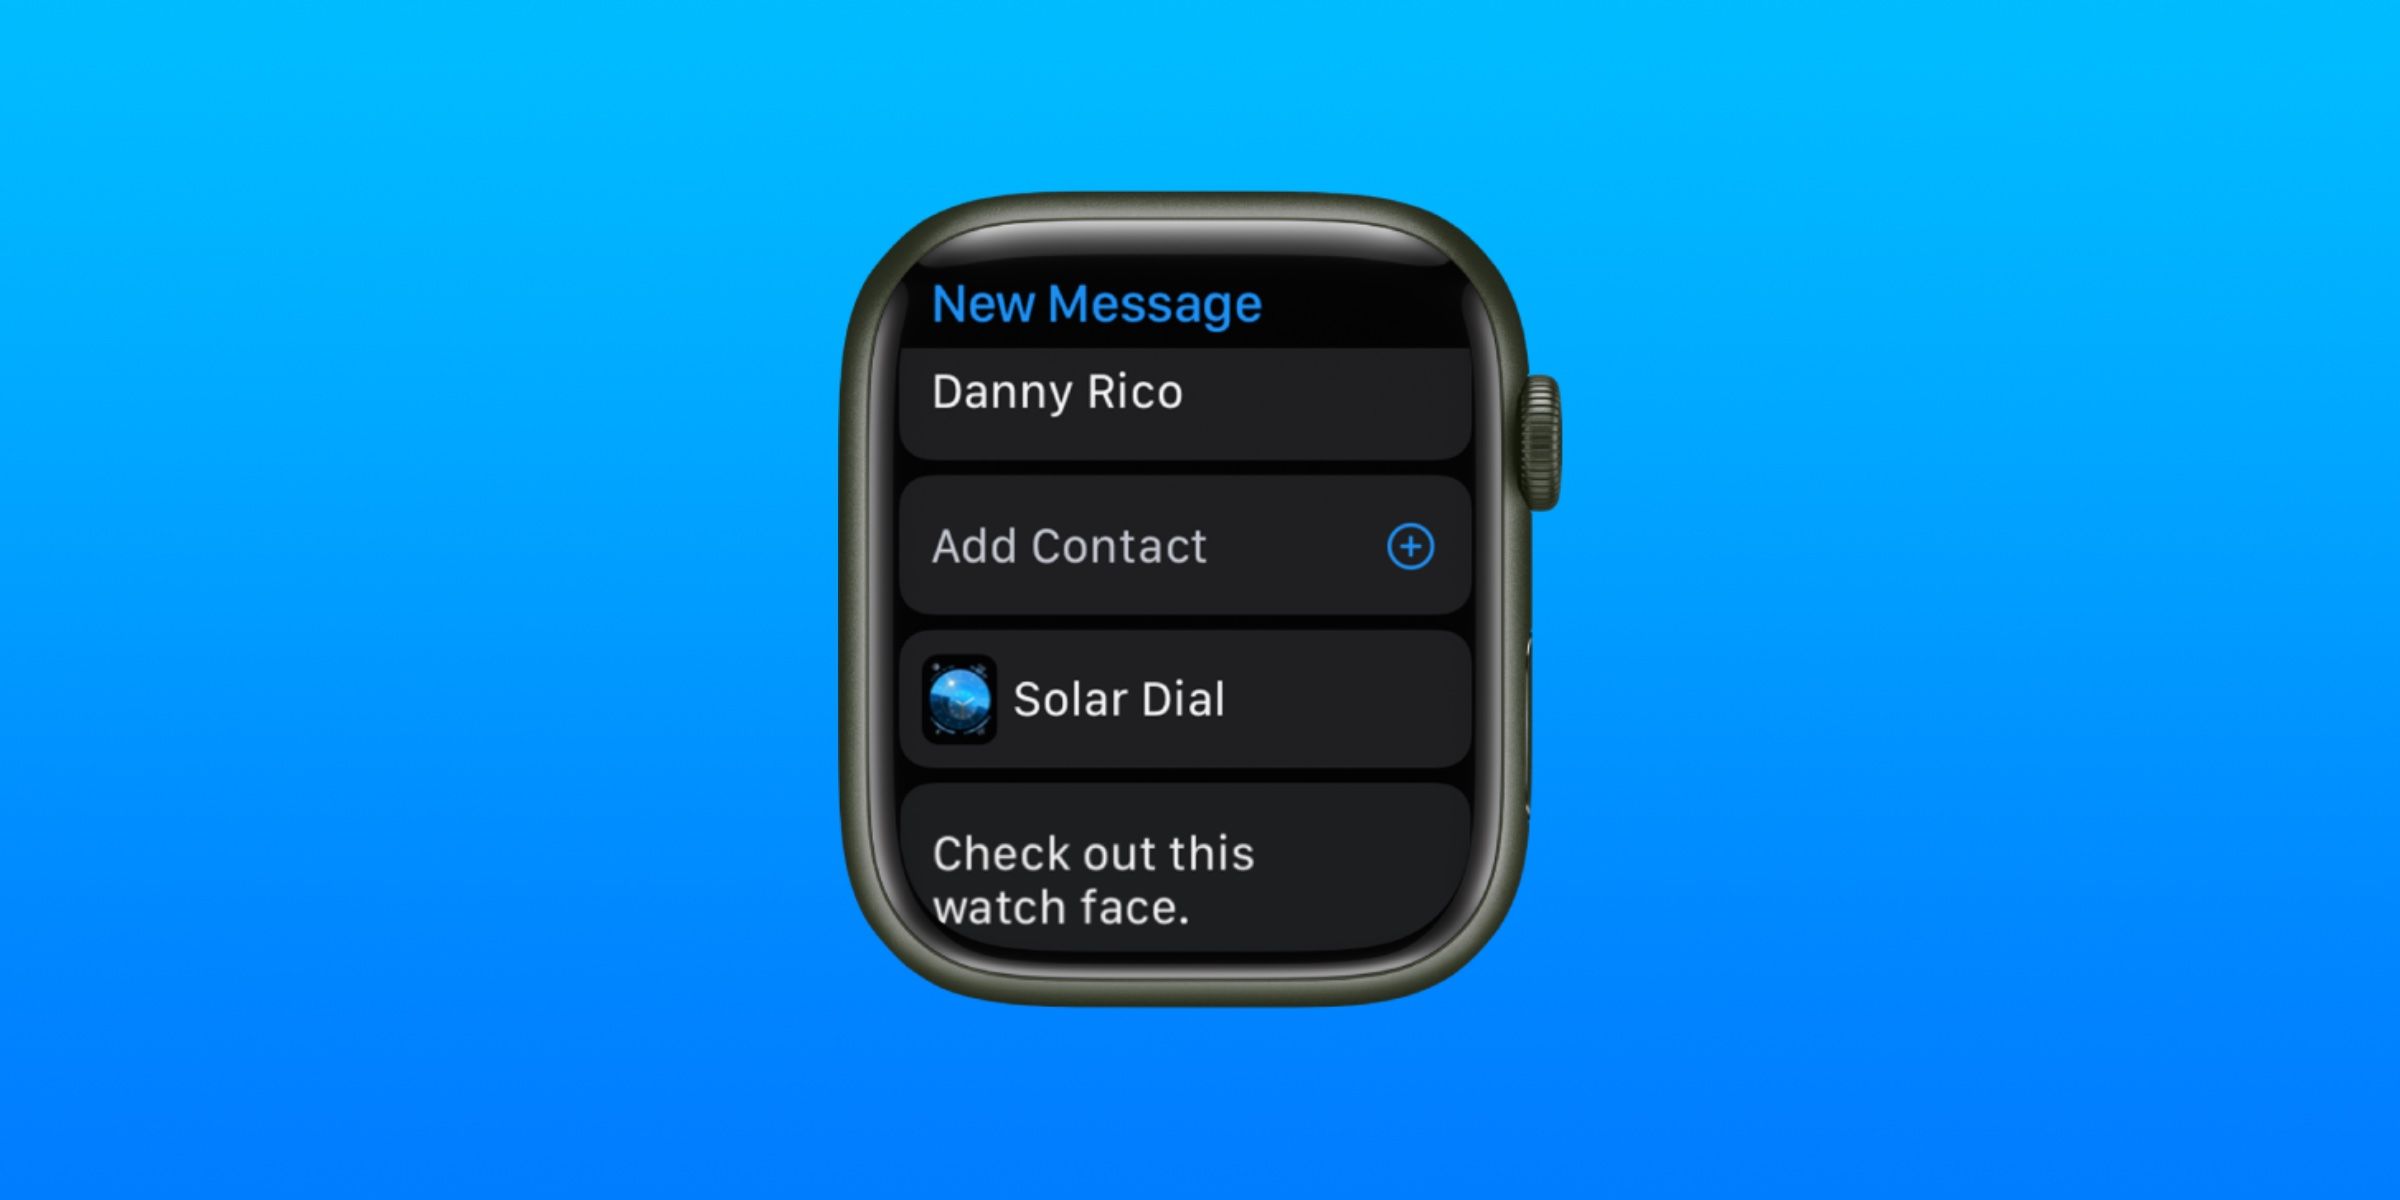 The Messages app on Apple Watch sending a Watch Face to a friend.